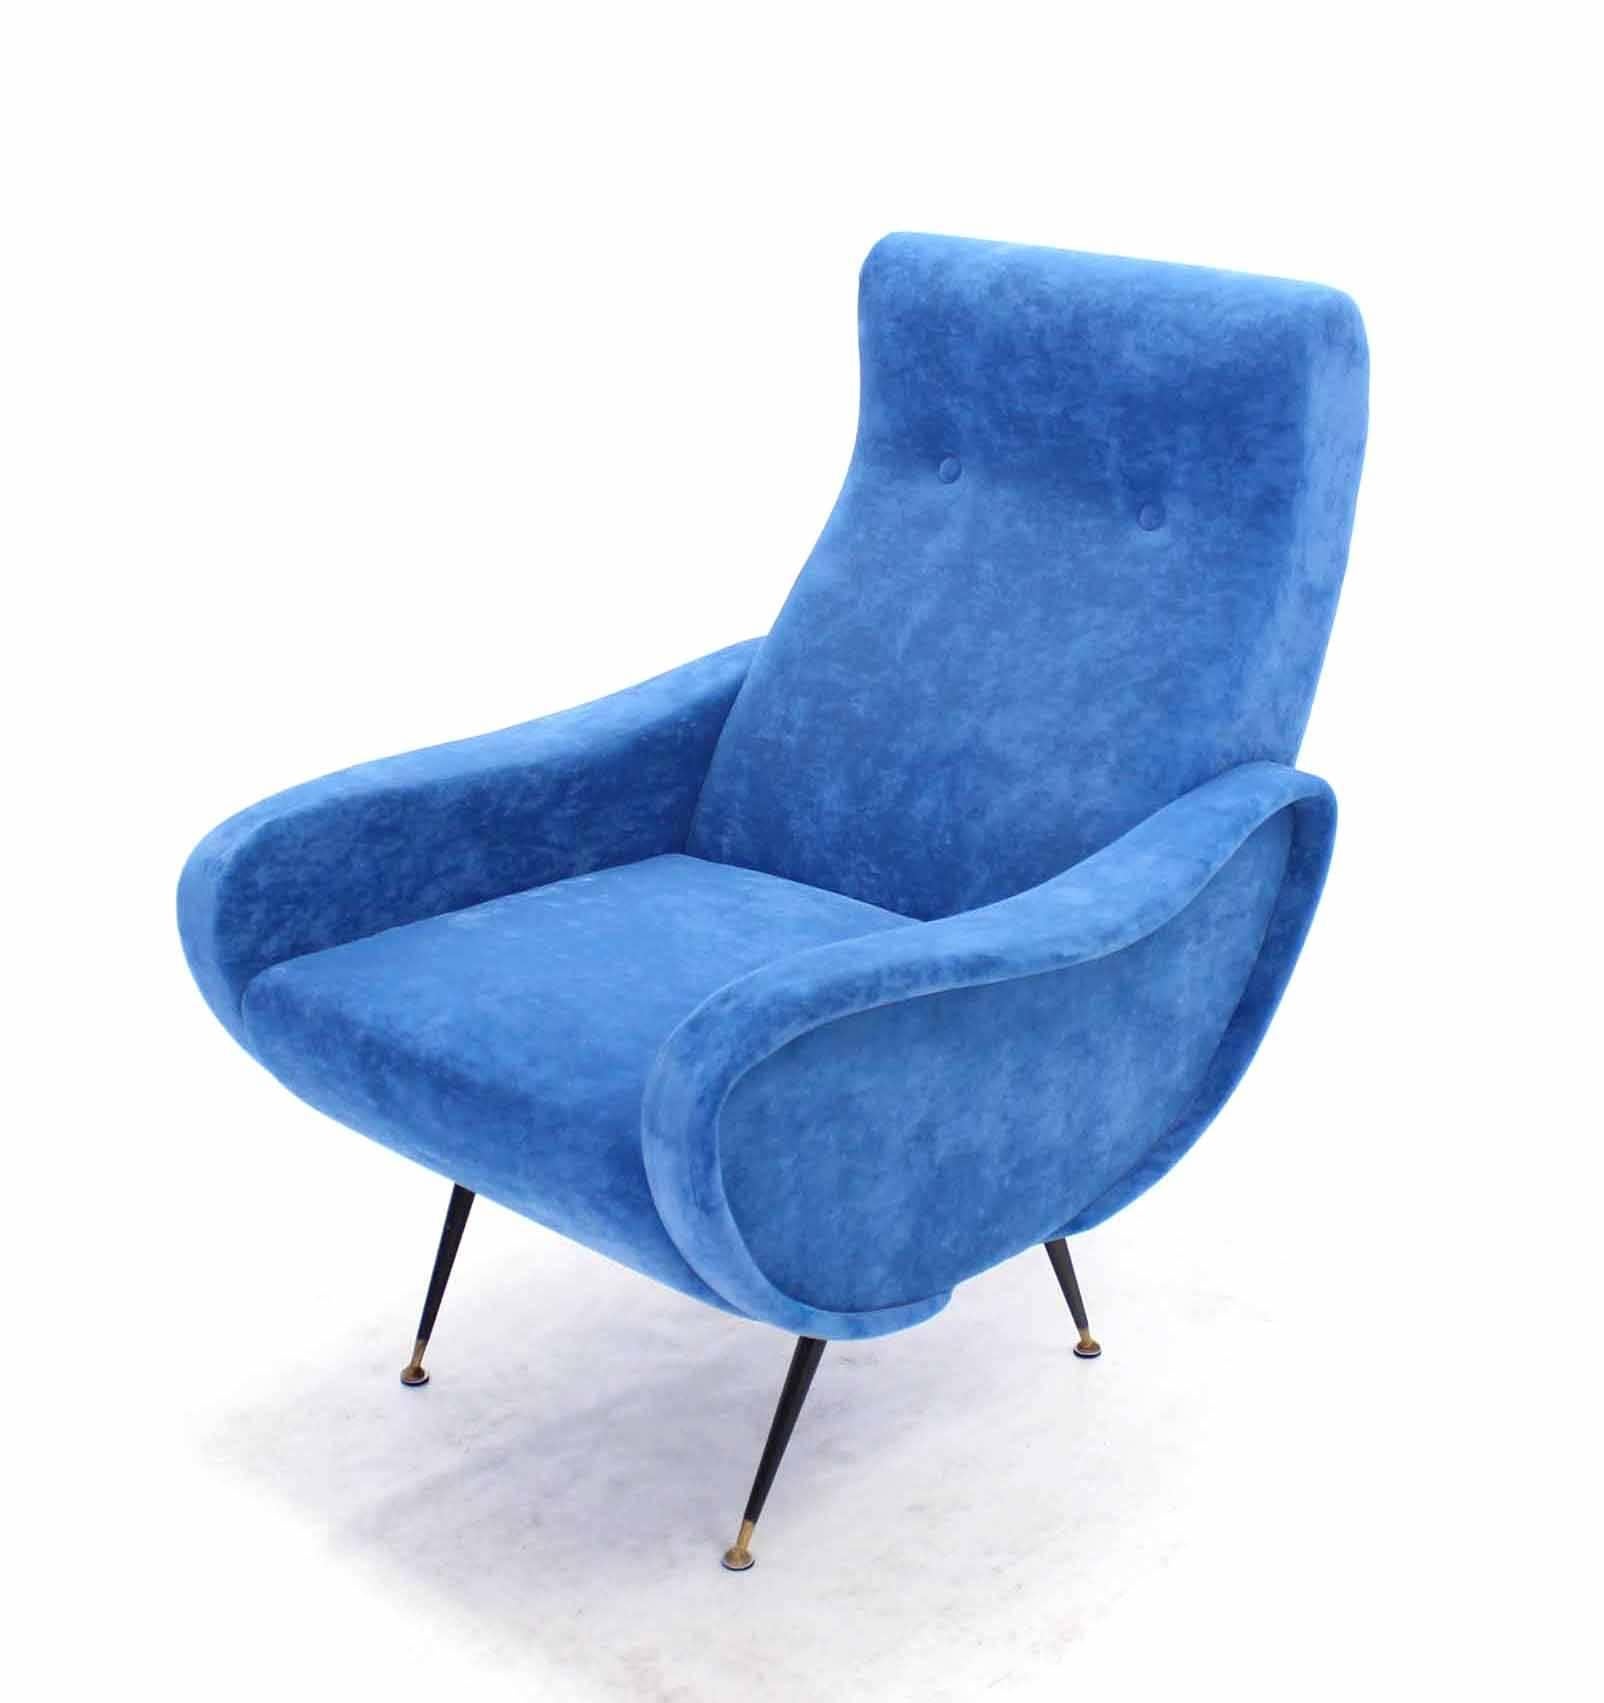 American Pair of Mid-Century Italian Modern Blue Upholstery Lounge Chairs